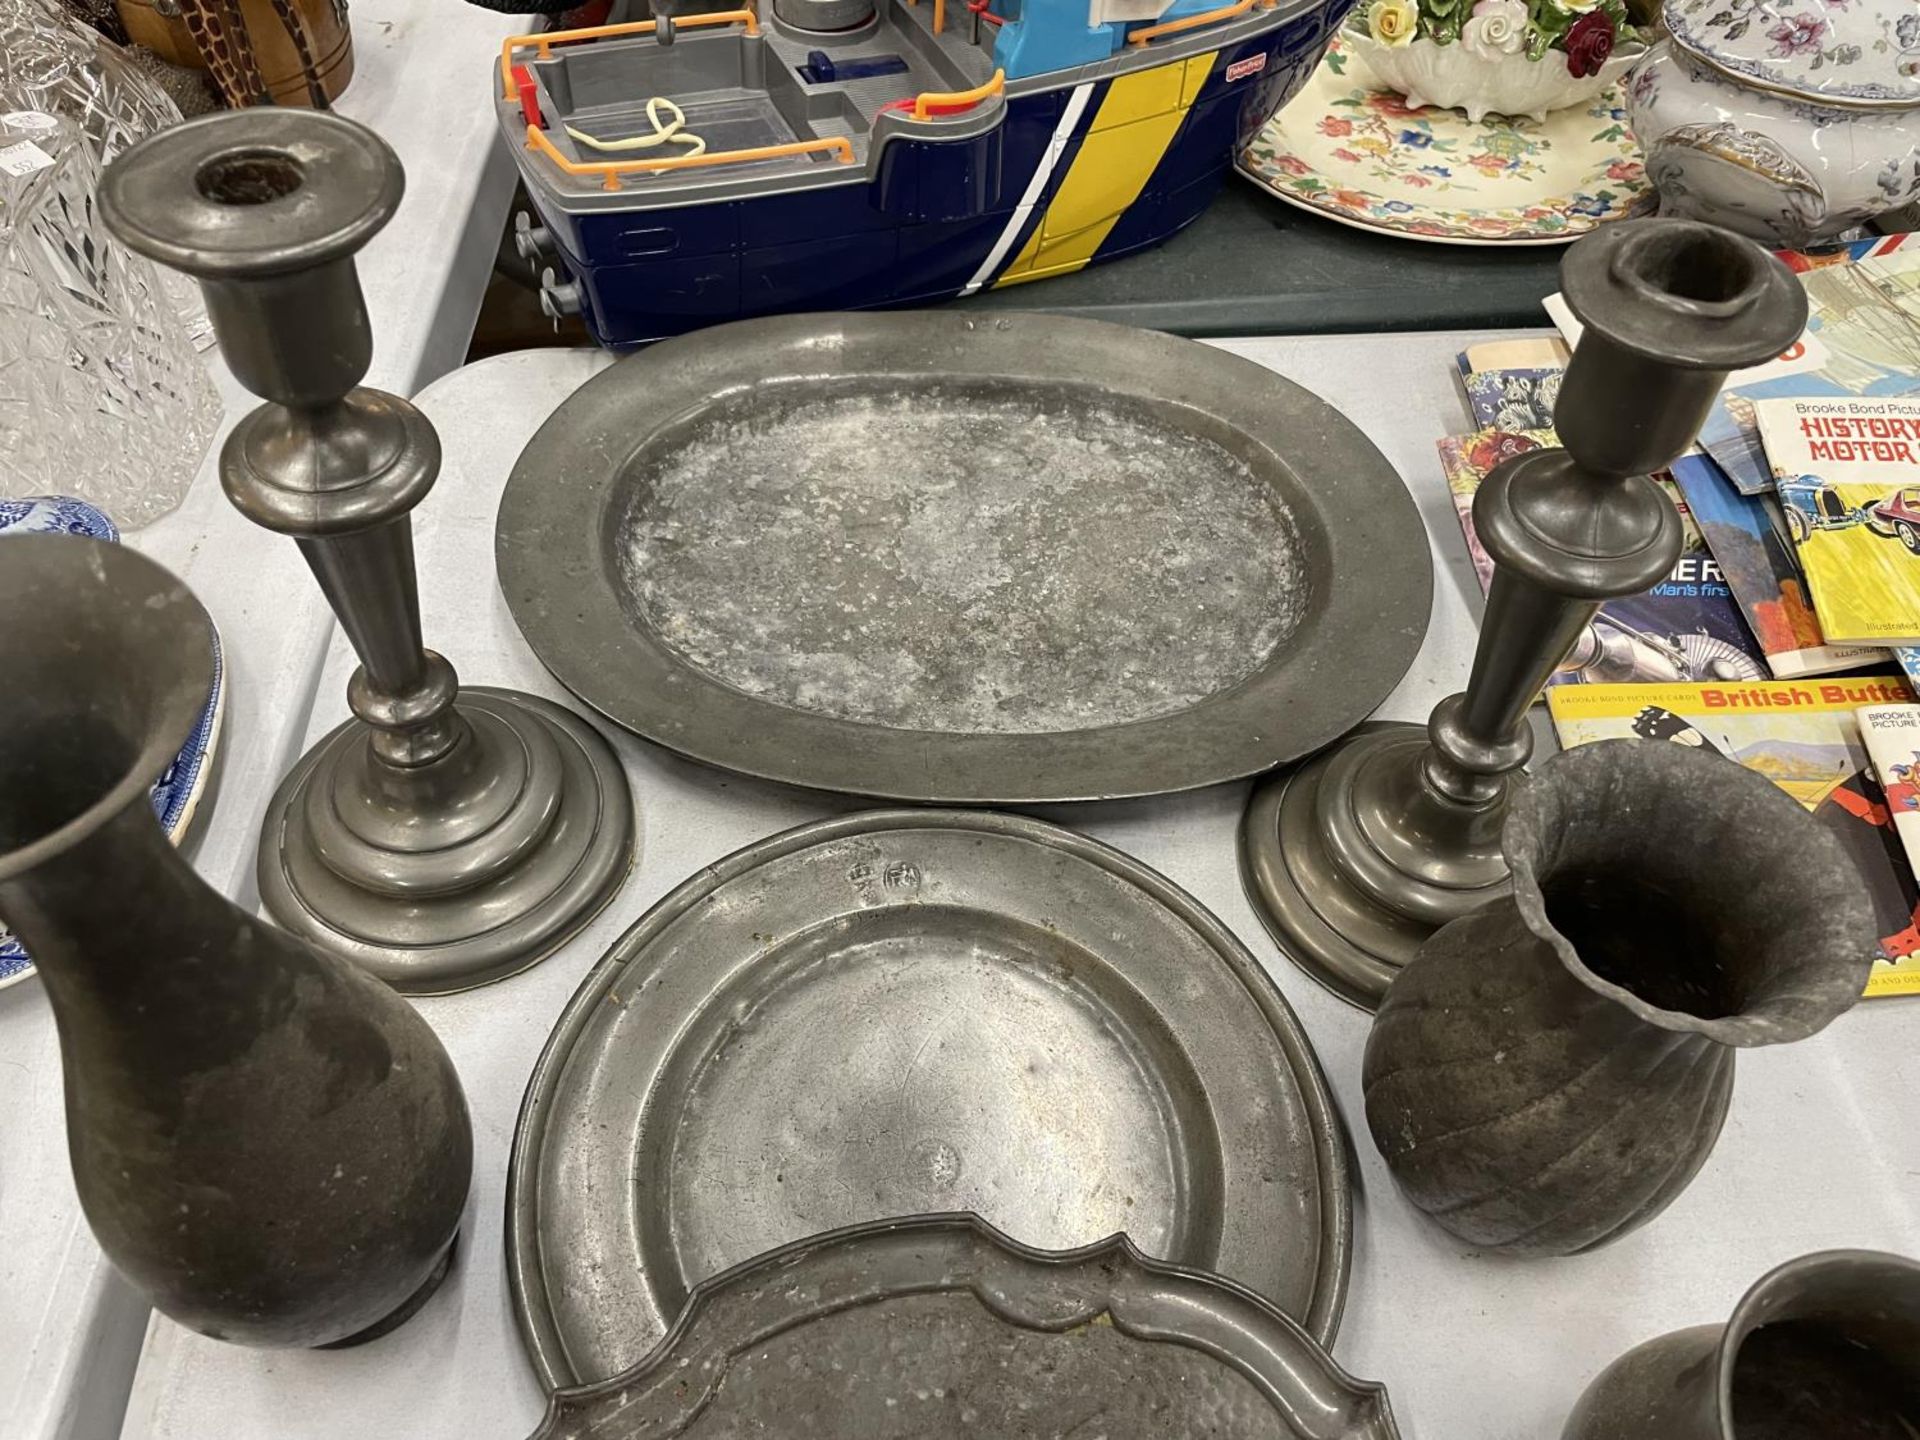 A LARGE QUANTITY OF VINTAGE PEWTER TO INCLUDE PLATES, VASES, CANDLESTICKS AND TANKARDS - Image 3 of 3